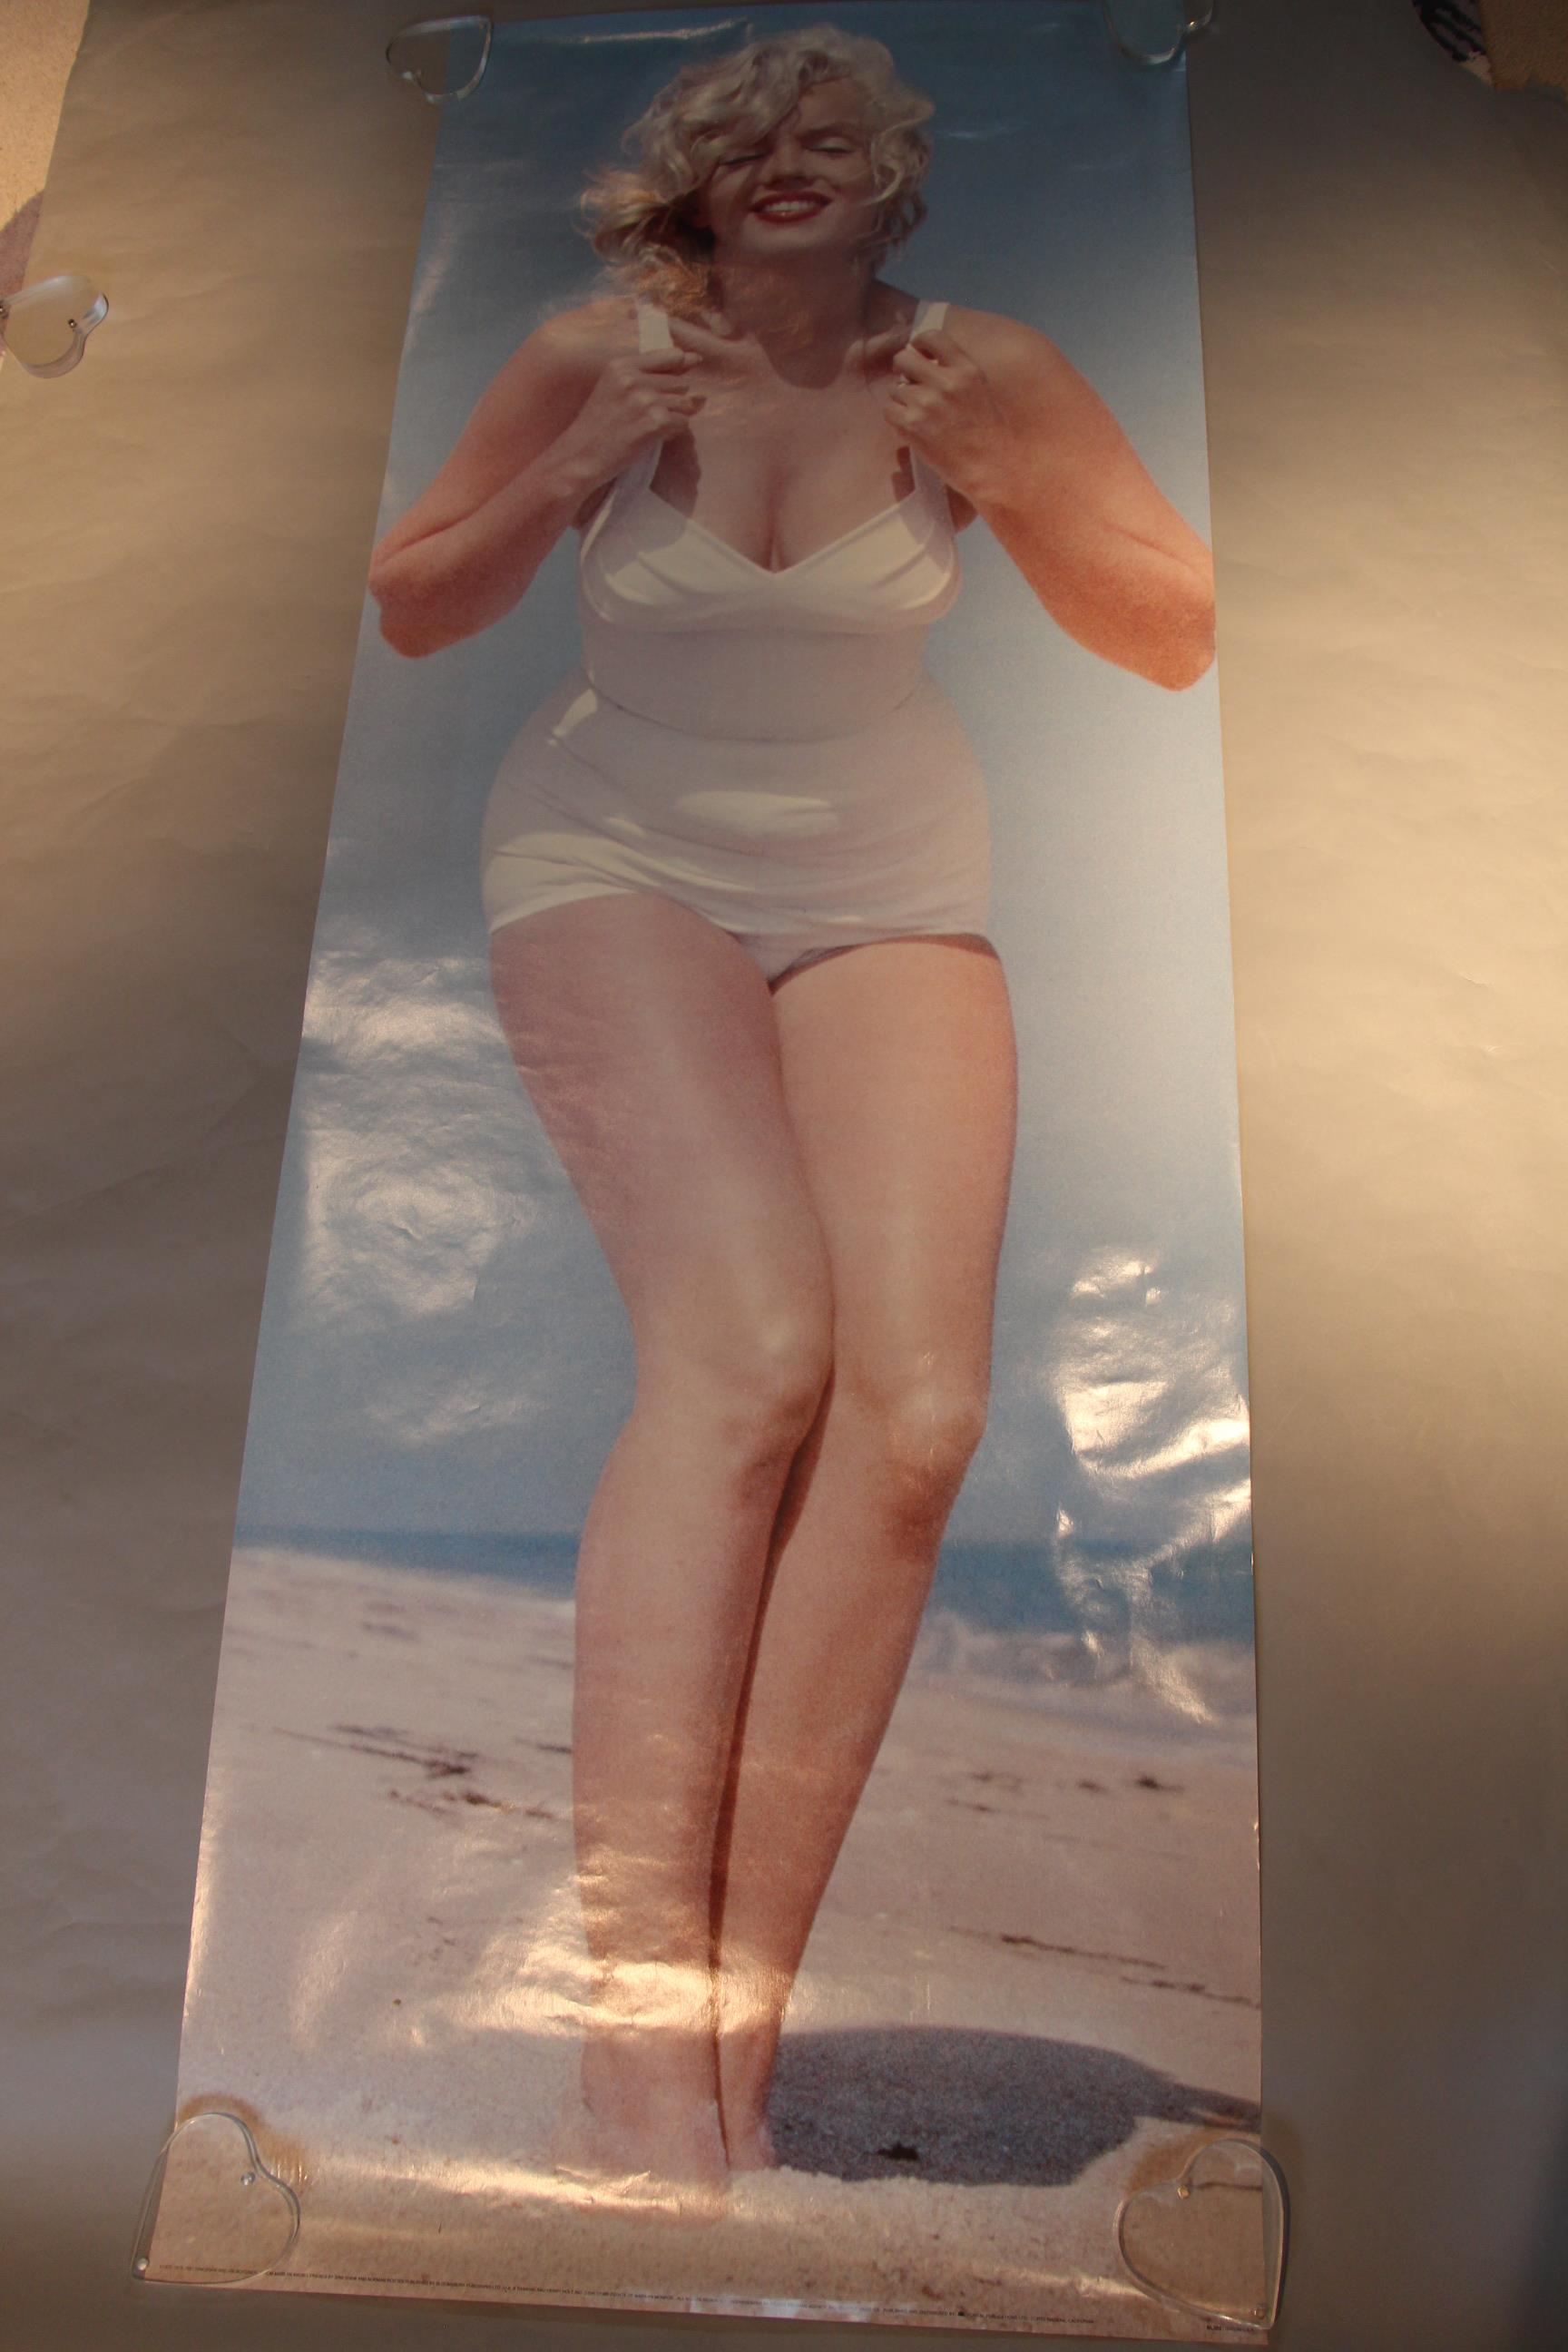 Marilyn Monroe door panel poster picturing Marilyn in a full length photo wearing a white bikini